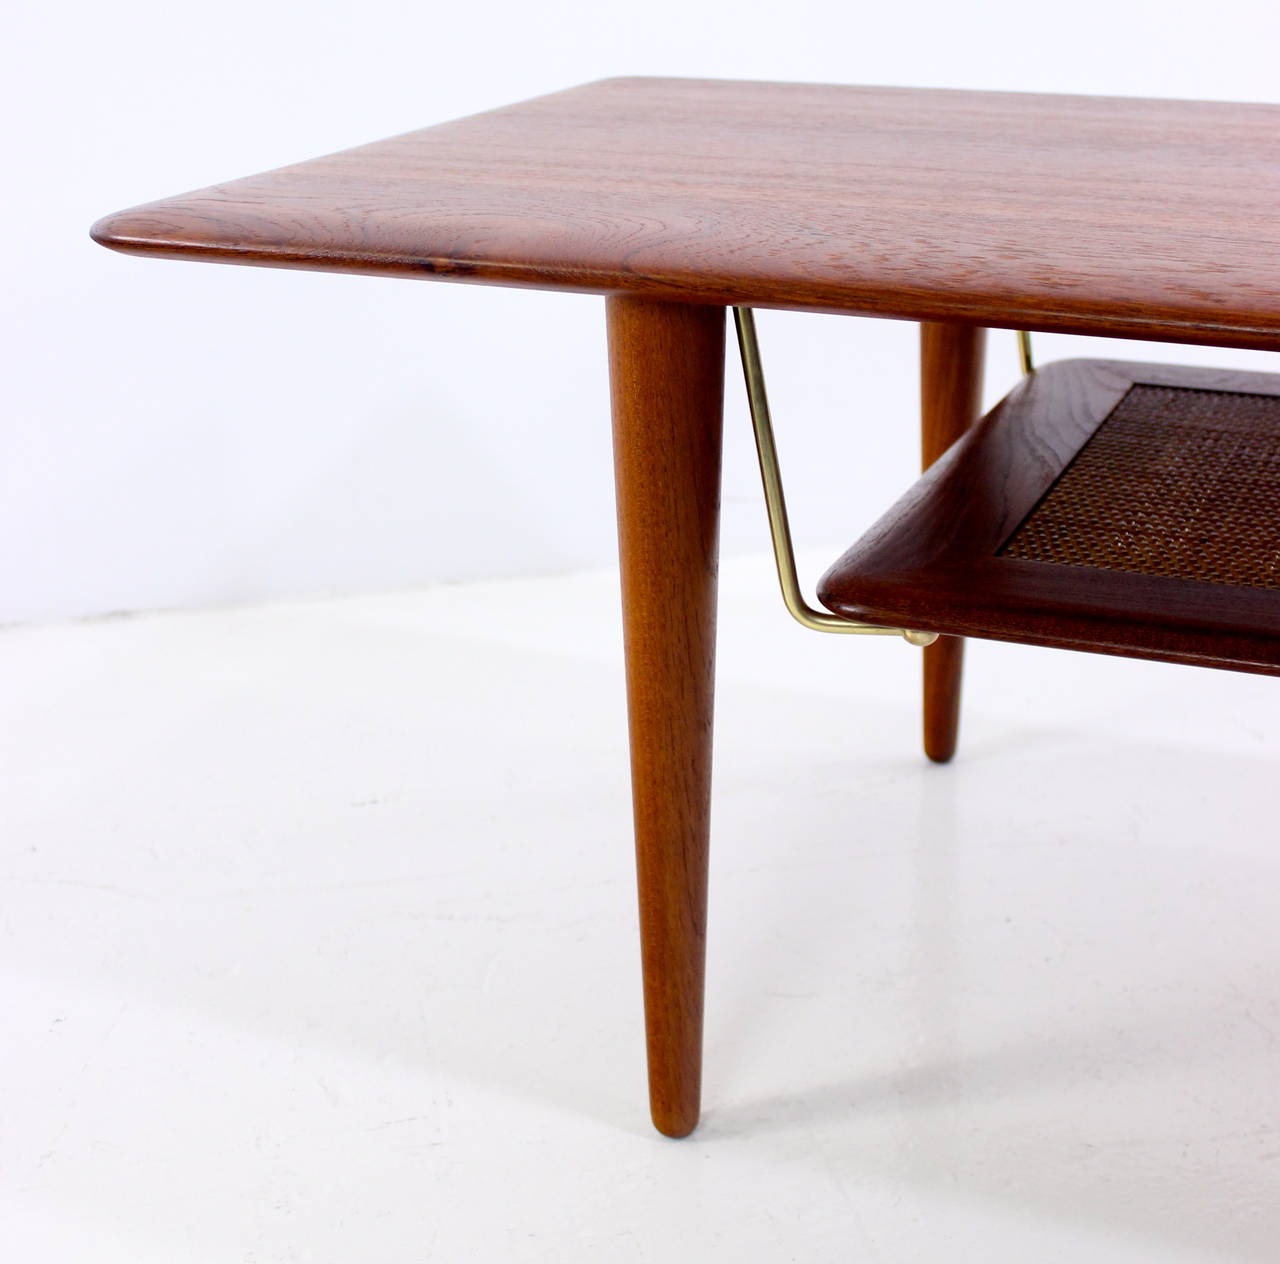 20th Century Danish Modern Solid Teak Cocktail or Coffee Table Designed by Peter Hvidt For Sale